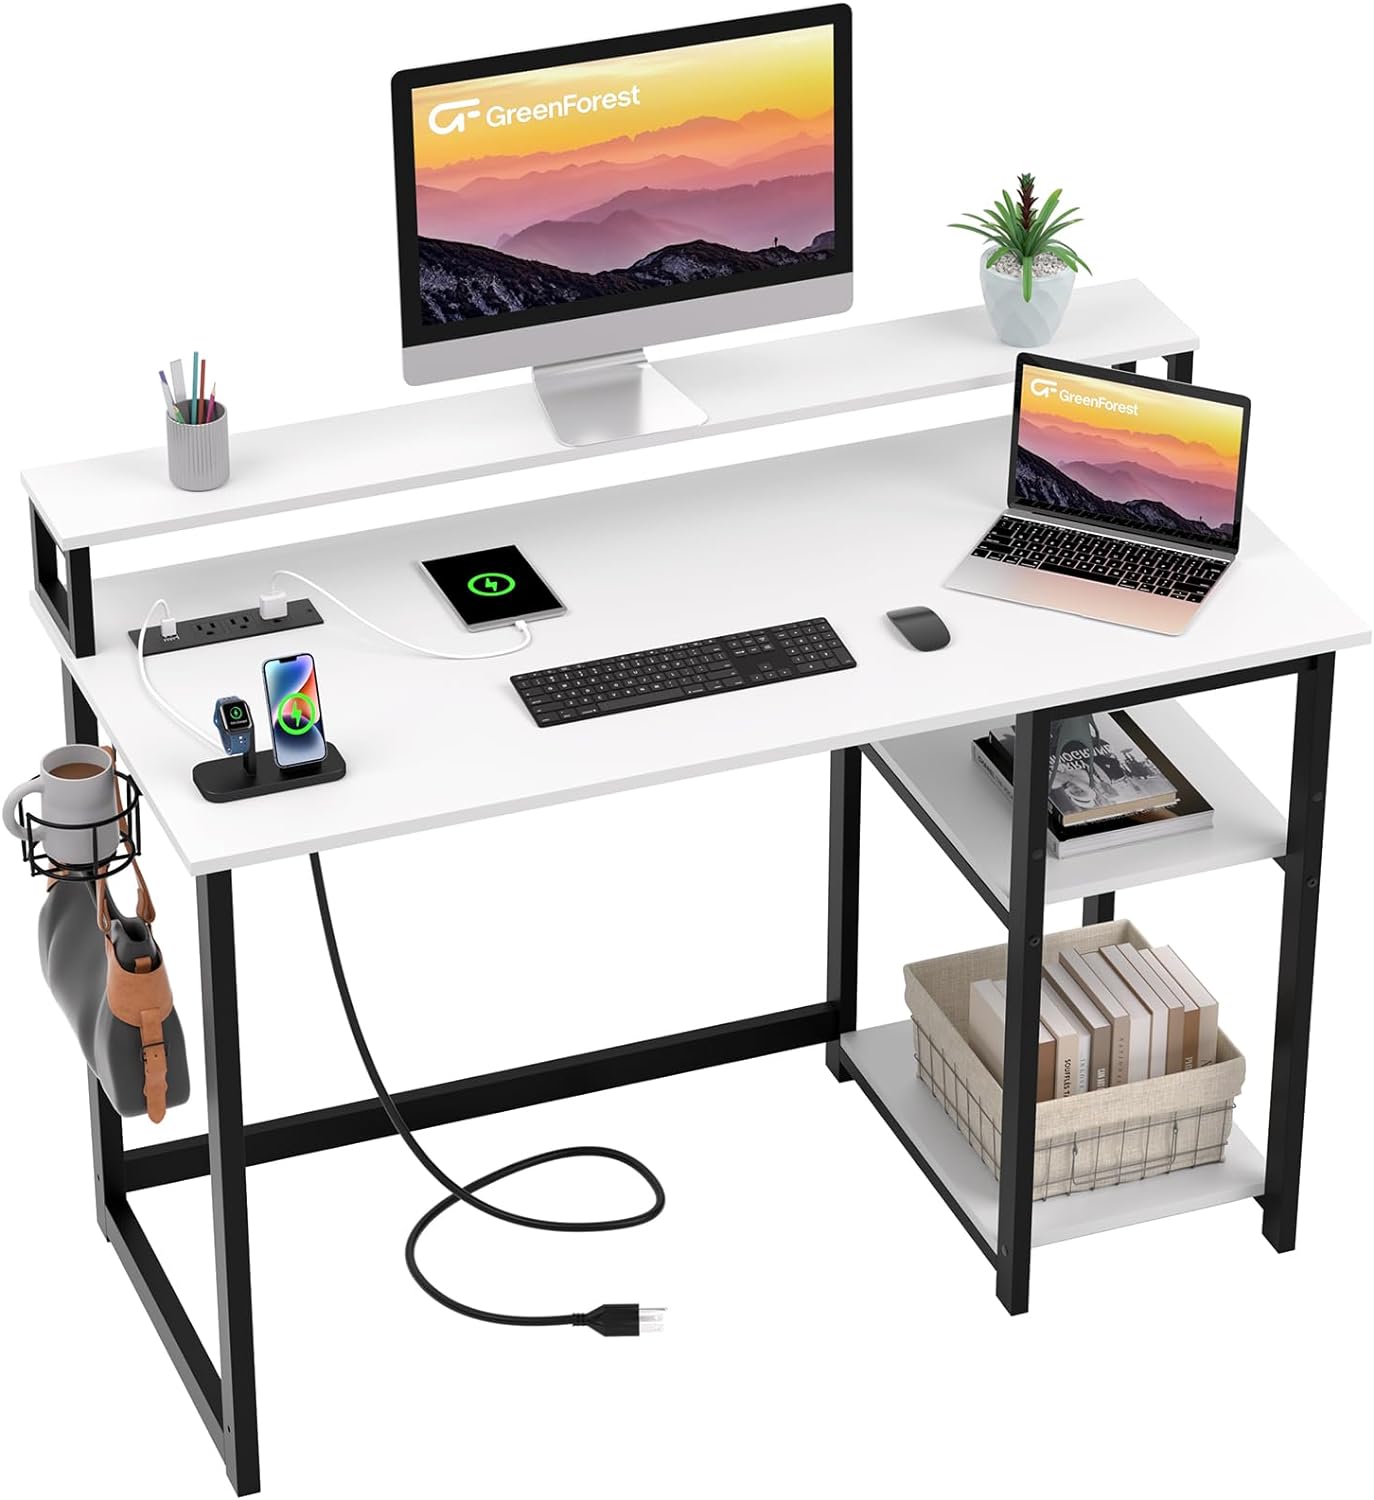 GreenForest Computer Desk with USB Charging Port and Power Outlet, Reversible Small Desk with Monitor Stand and Storage Shelves for Home Office, 40 in Work Desk with Cup Holder Hook, White